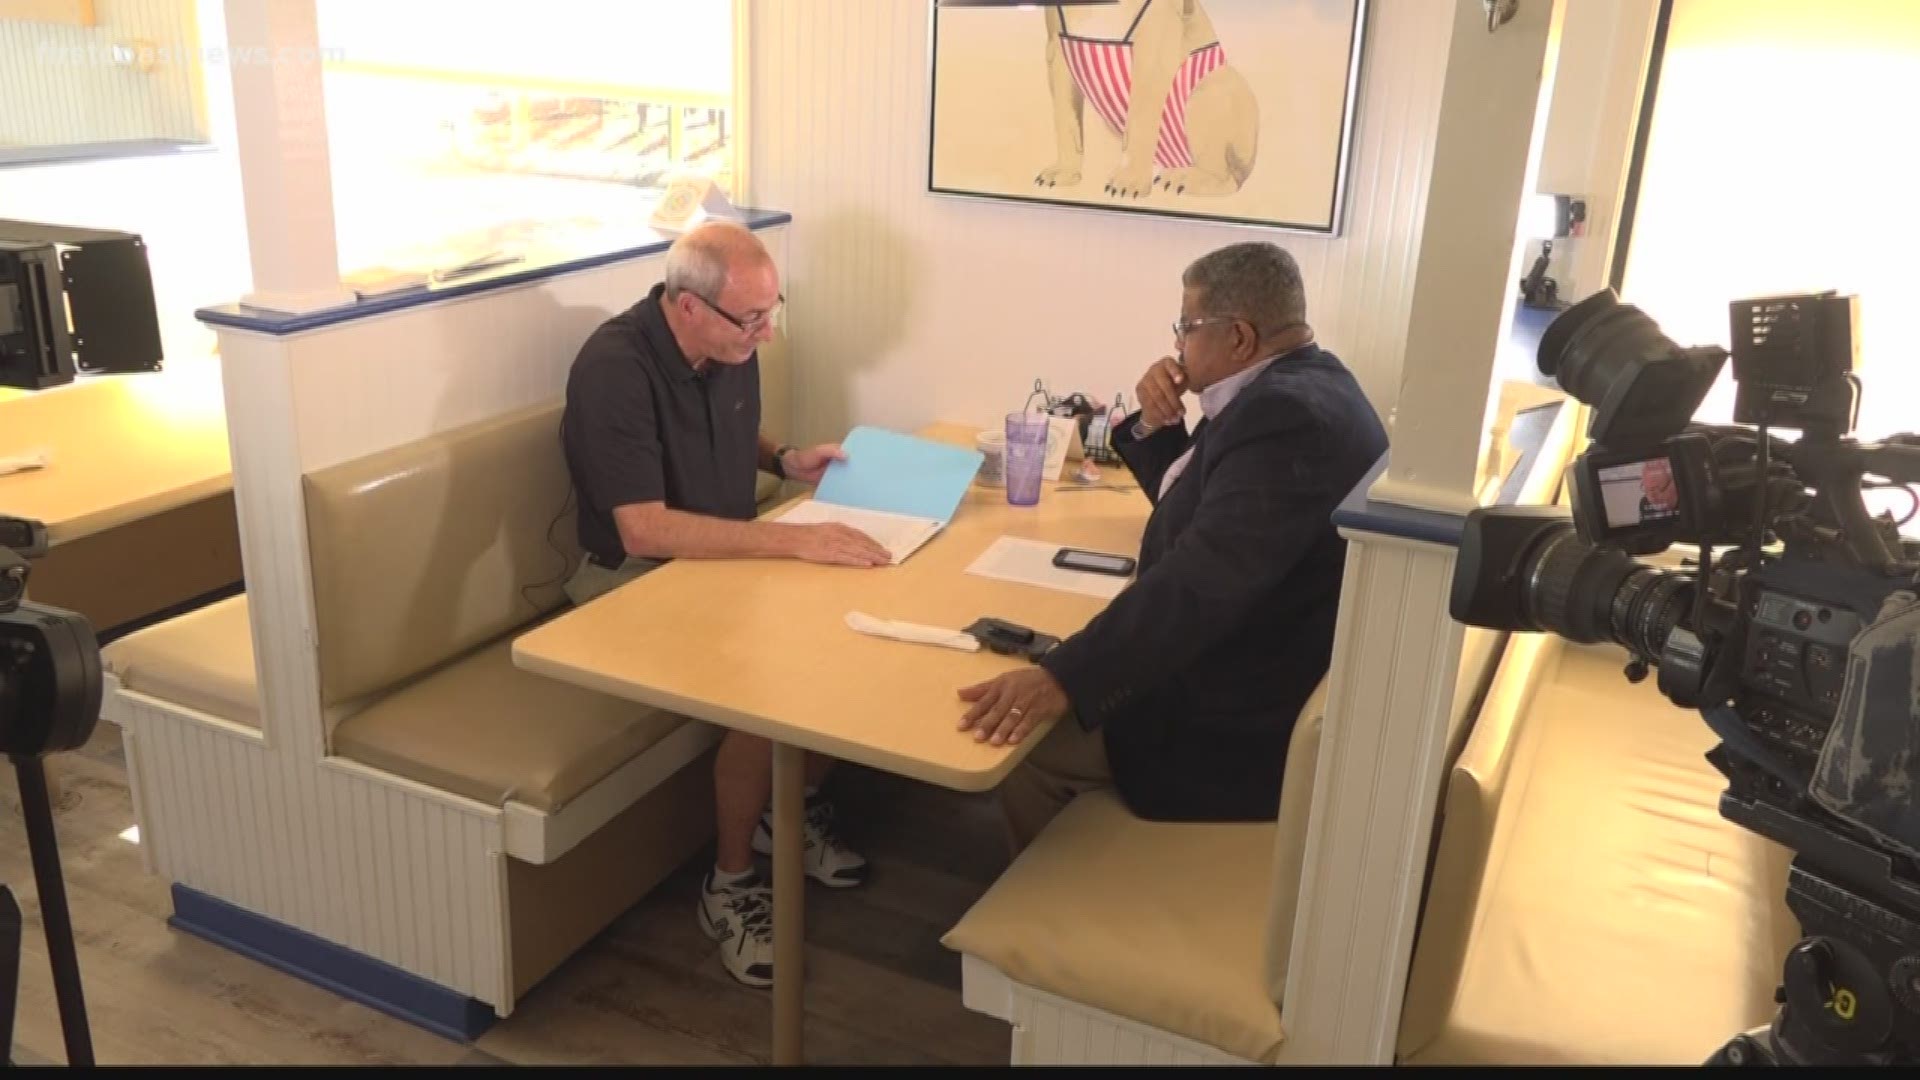 Mike Agner came to Beach Diner with his paperwork about a problem with the former General Motors Acceptance Corporation. "My wife was one of the survivors in the GMAC massacre," he said.